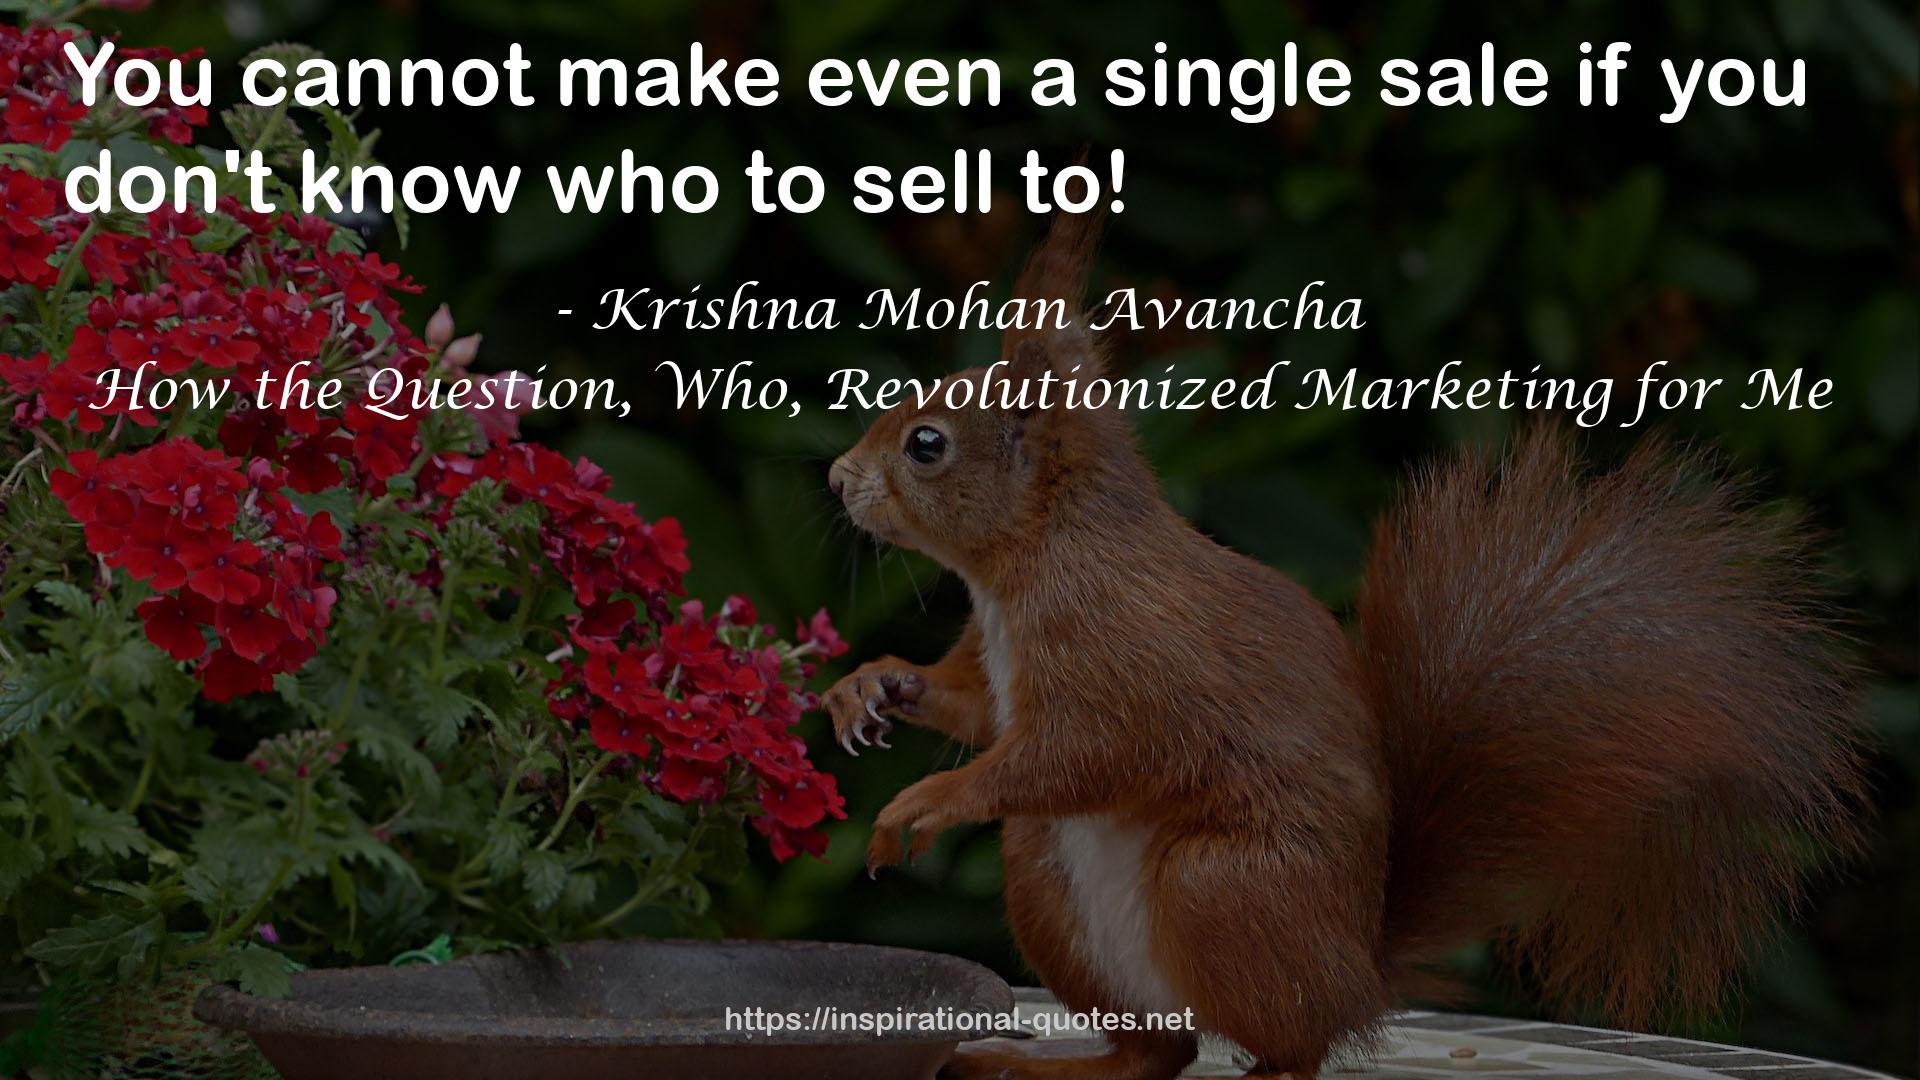 How the Question, Who, Revolutionized Marketing for Me QUOTES